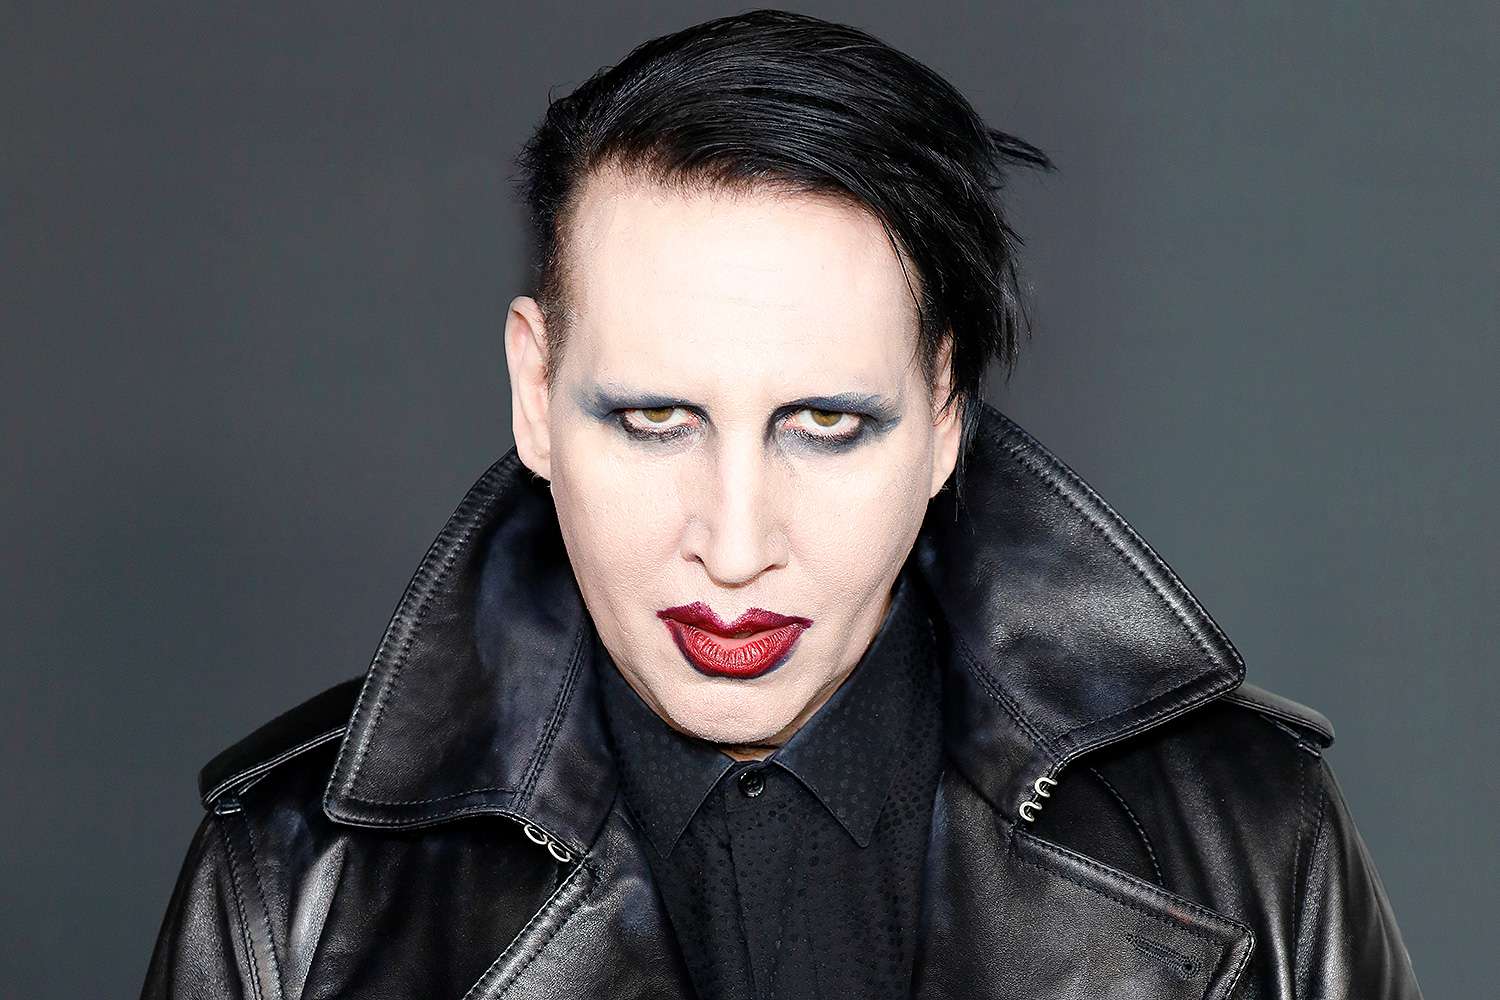 Marilyn Manson / Marilyn Manson On Twitter The 3 Stooges Jh Jd Mm Photo ...